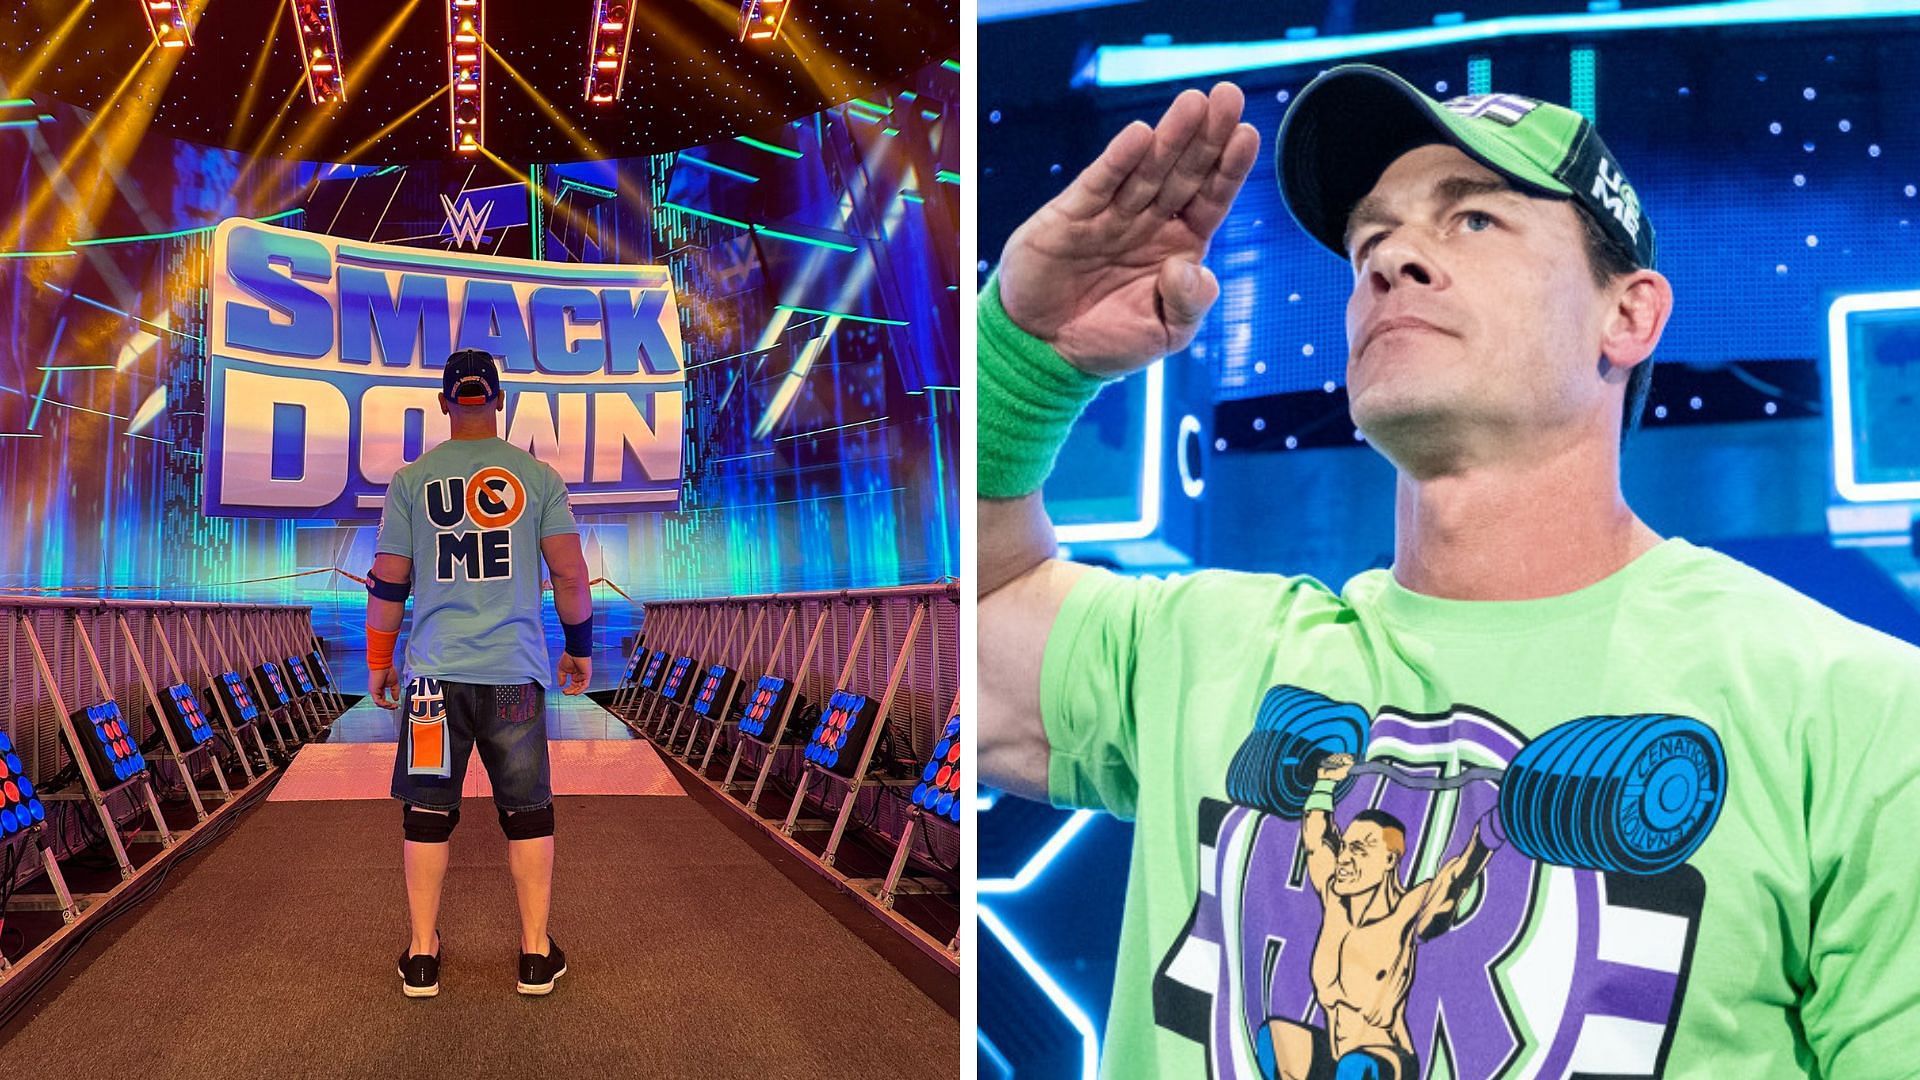 John Cena suffered another lose ahead of this week